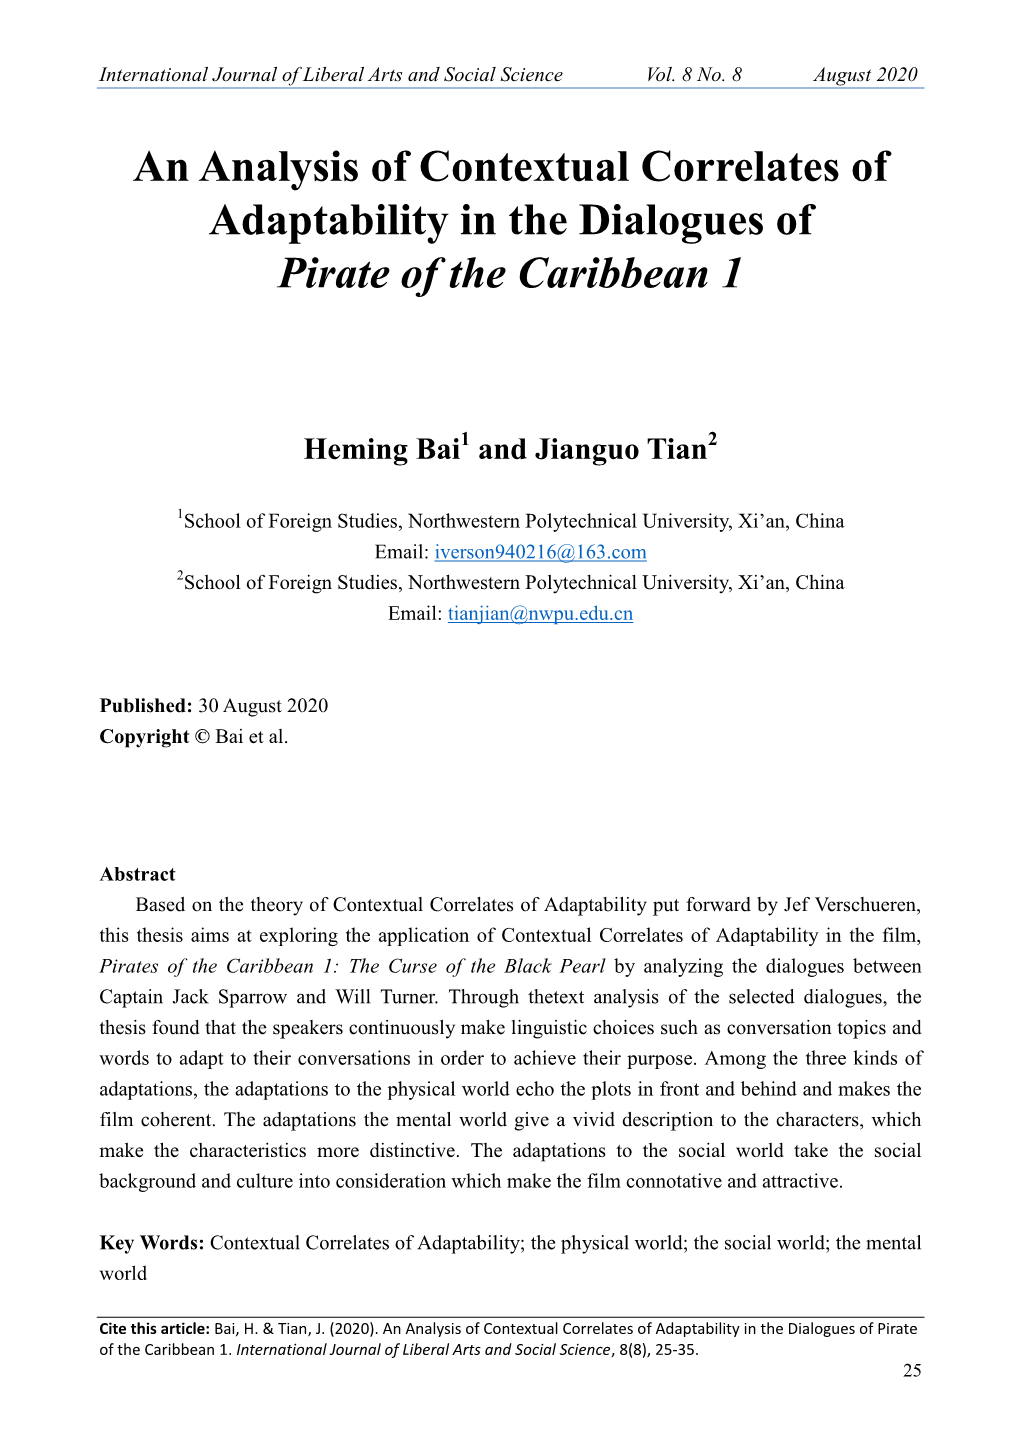 An Analysis of Contextual Correlates of Adaptability in the Dialogues of Pirate of the Caribbean 1